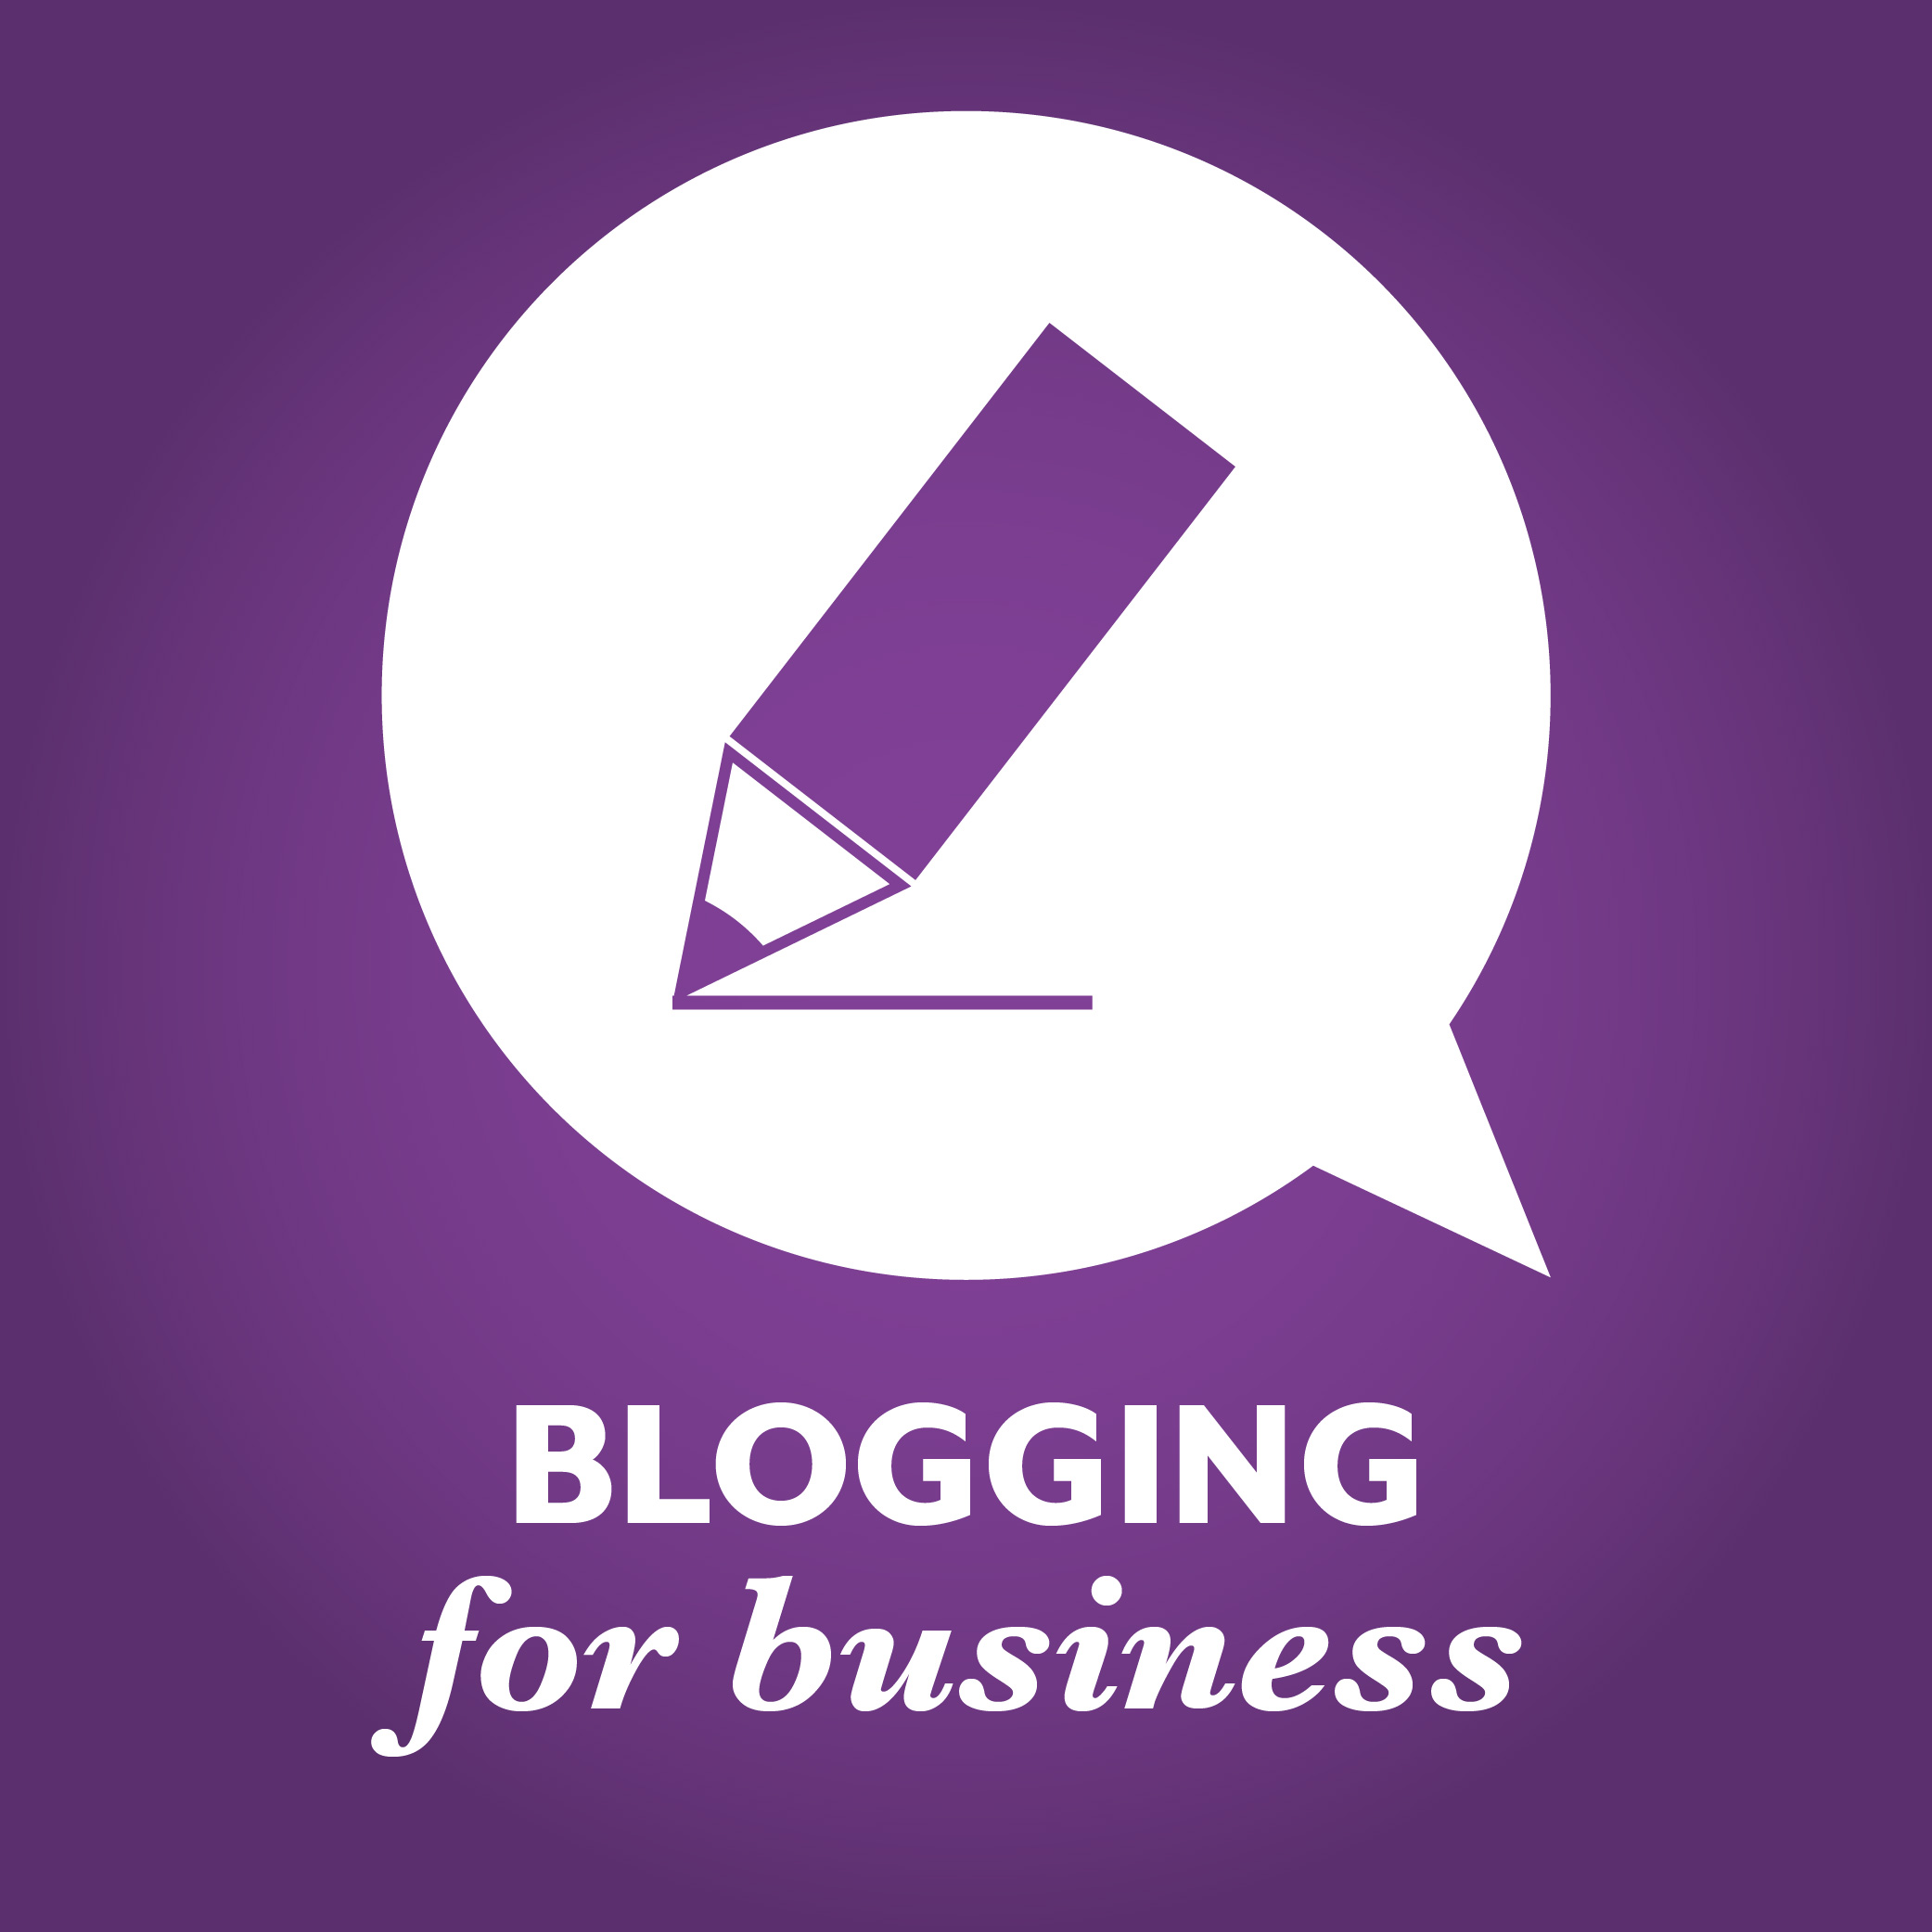 Blogging for Business: An Important Part of Getting Found Online